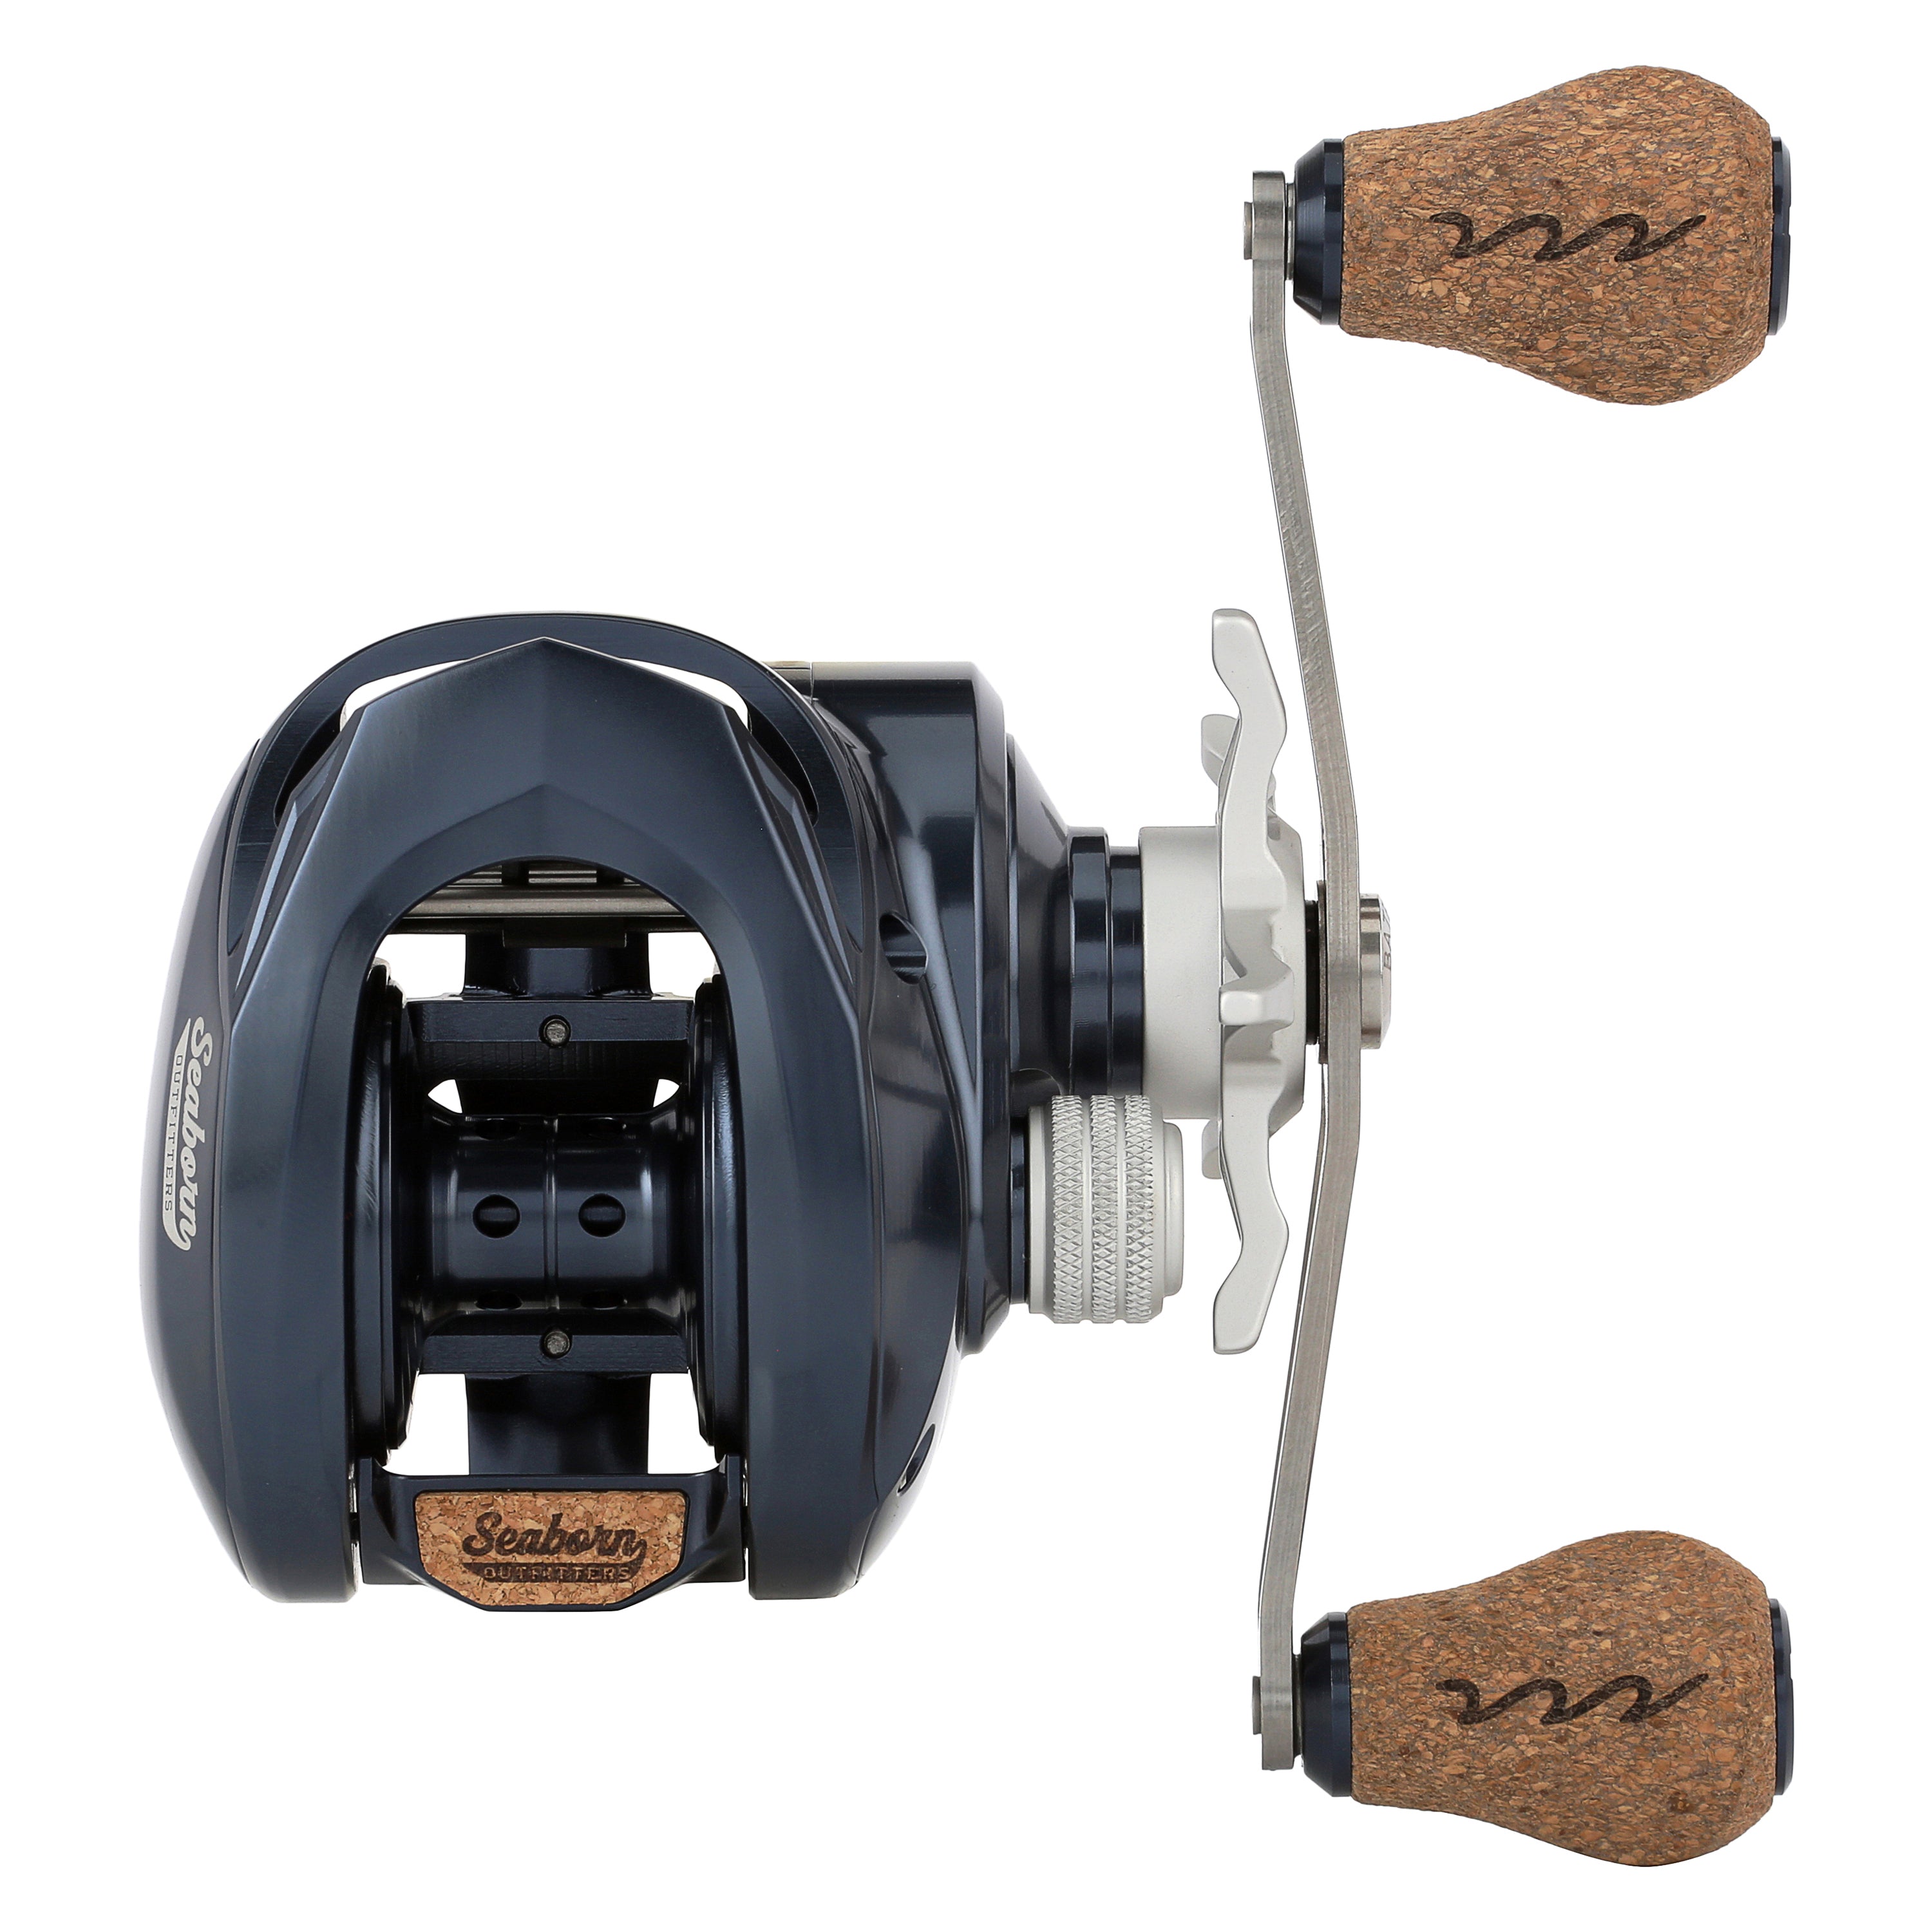 Close up of unidentifiable bait caster fishing reel and rubber